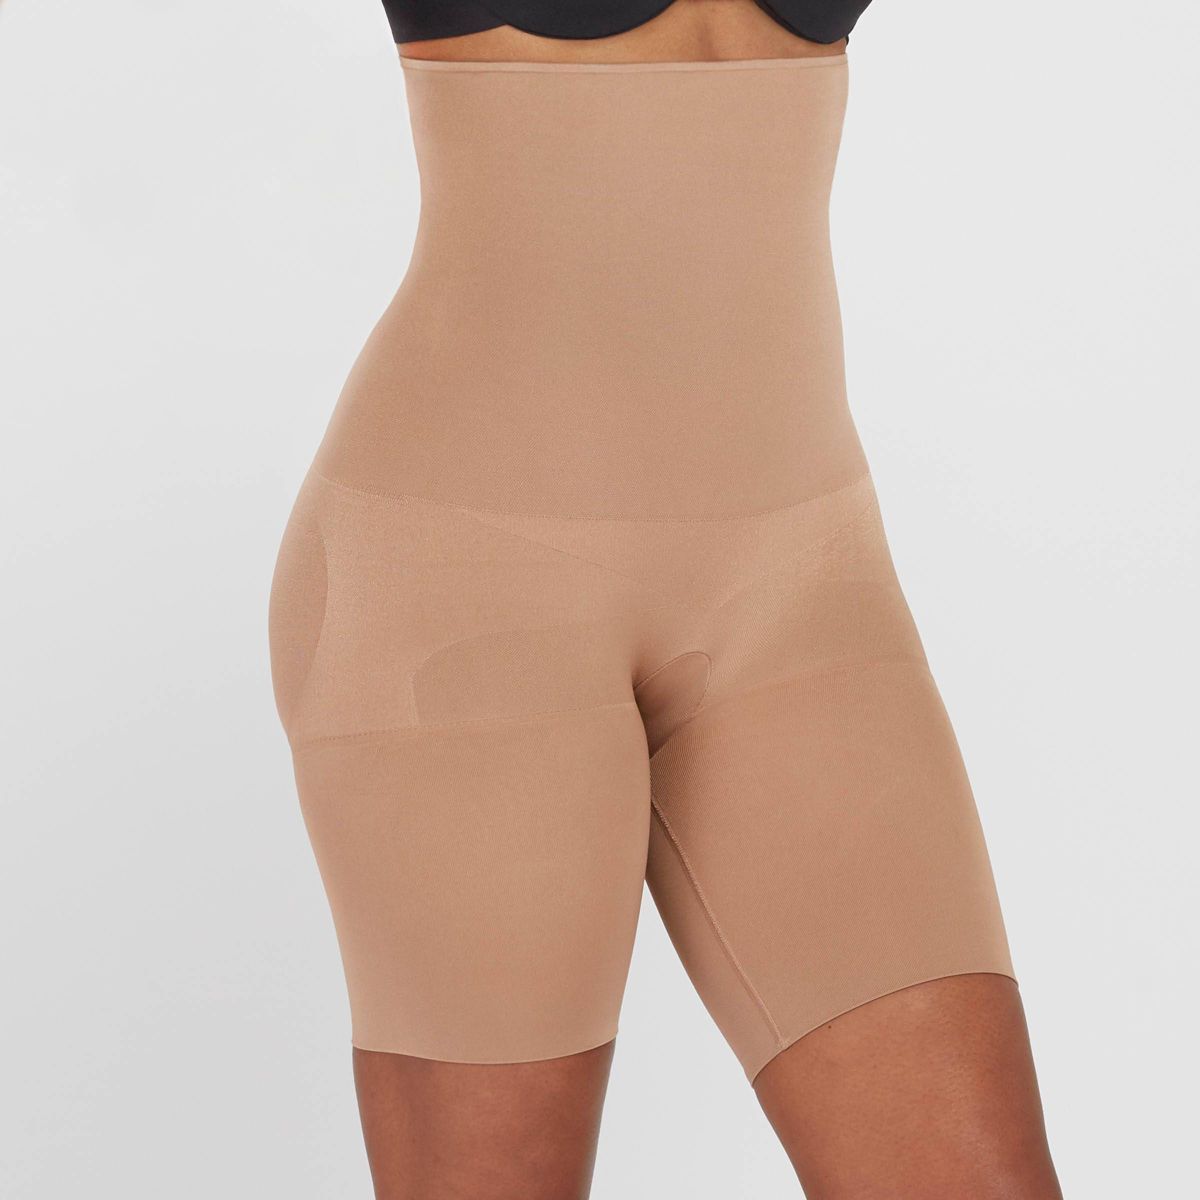 ASSETS by SPANX Women's Remarkable Results High-Waist Mid-Thigh Thigh Shapers - Café Au Lait L | Target